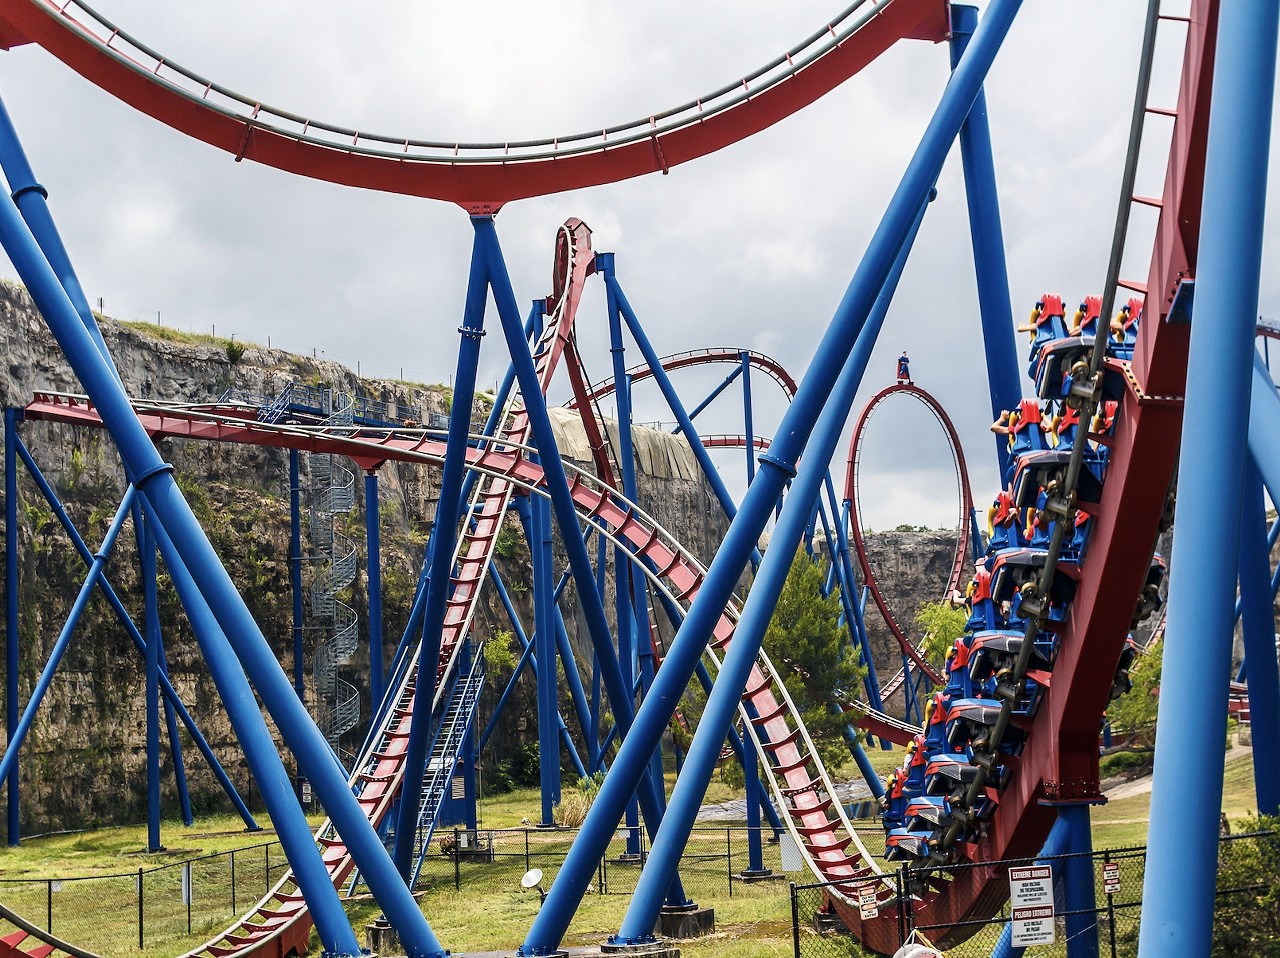 Six Flags Fiesta Texas
17000 W I-10, (210) 697-5050, sixflags.com/fiestatexas
Six Flags’ San Antonio outpost offers plenty of fun, both for tourists and locals alike. The park’s new rides and other upgrades mean that San Antonian thrill-seekers who have been going to the park their whole lives can find something new to enjoy on repeat visits.